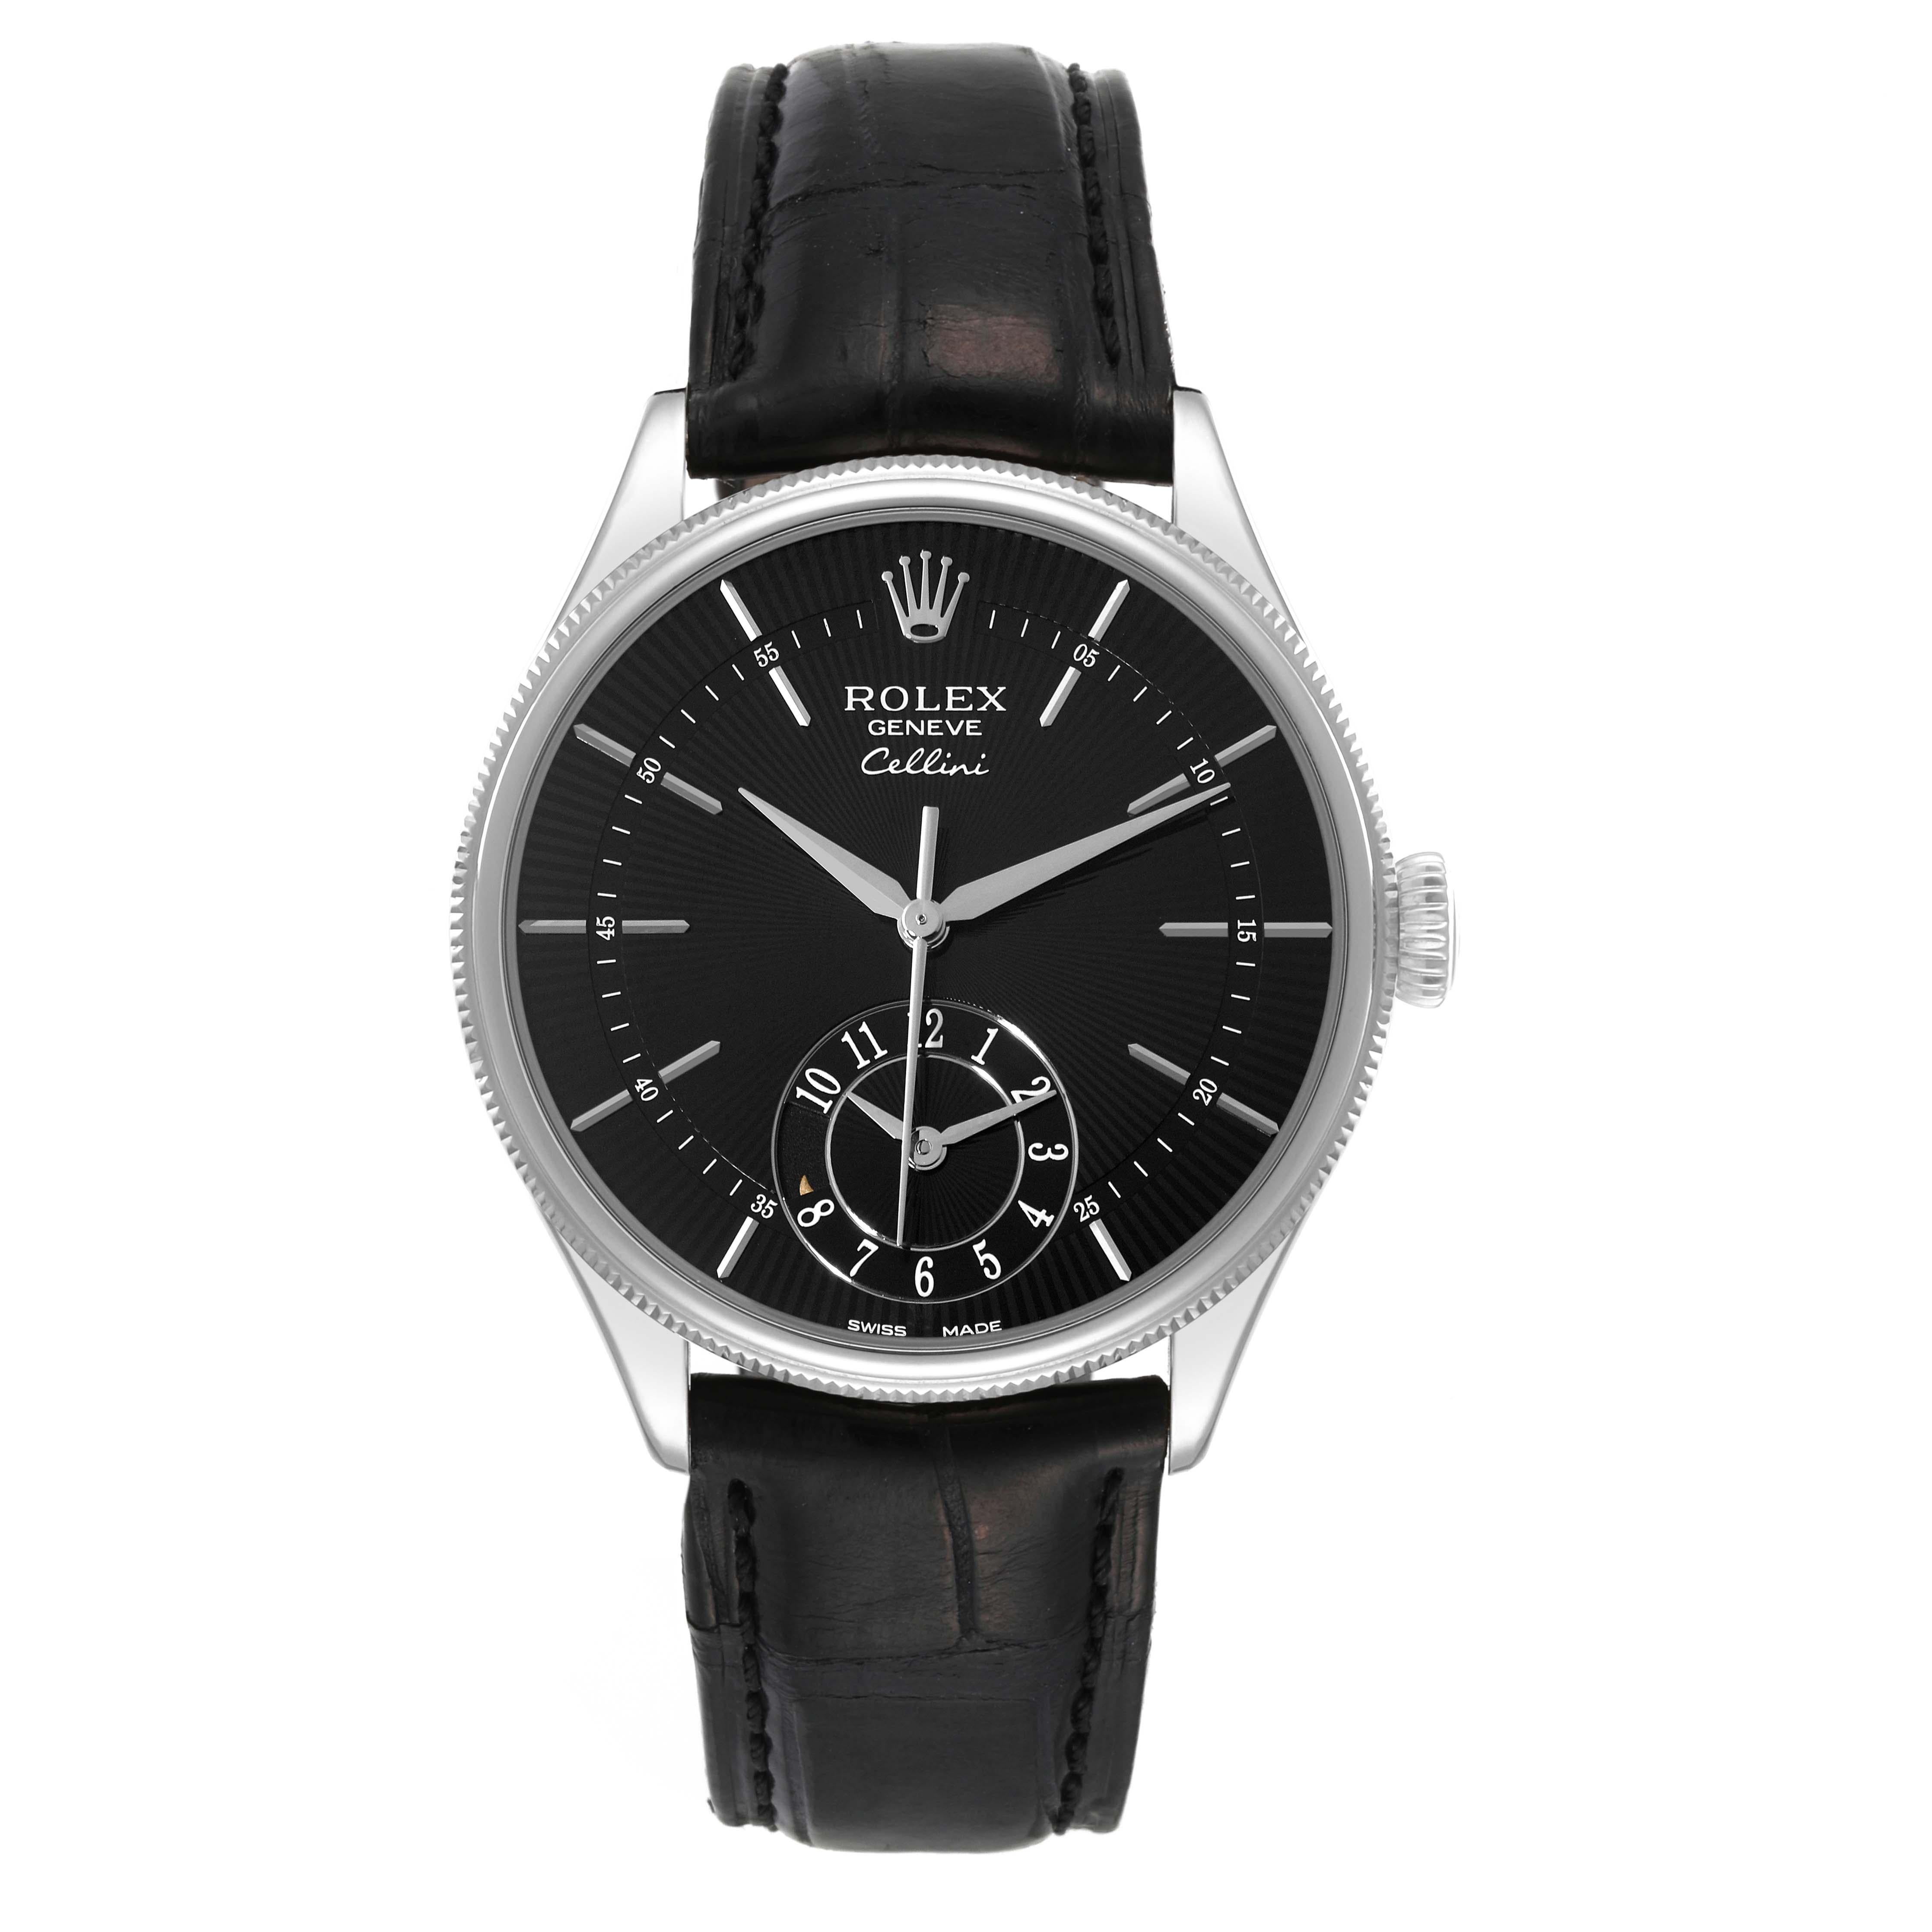 Rolex Cellini Dual Time White Gold Black Dial Automatic Mens Watch 50529. Automatic self-winding movement. Officially certified Swiss chronometer (COSC). Paramagnetic blue Parachrom hairspring. Bidirectional self-winding via Perpetual rotor. 18K